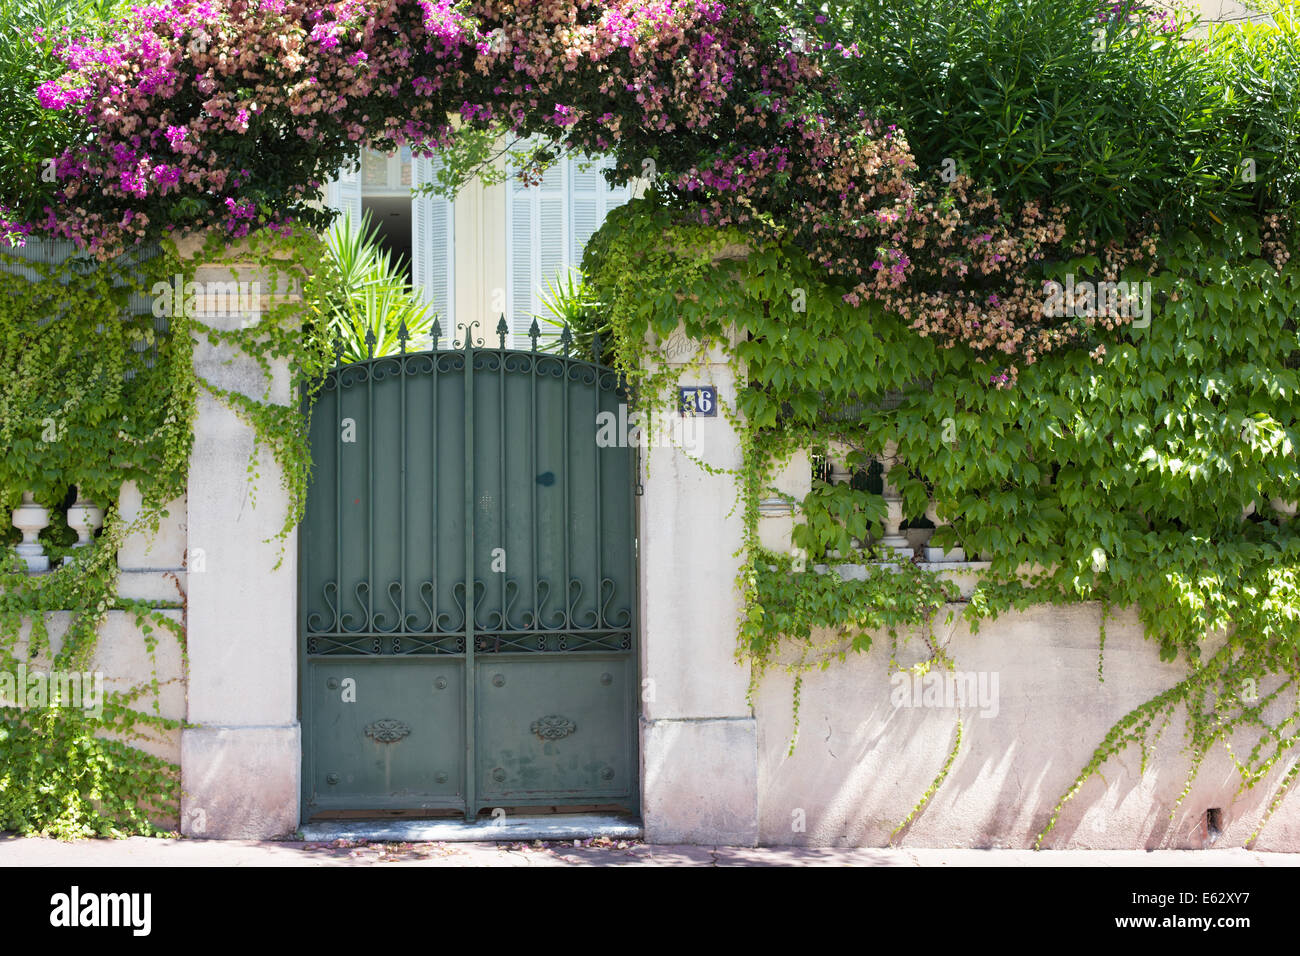 Flowers and plants adorn the gated entrance to a home in Cannes, France Stock Photo